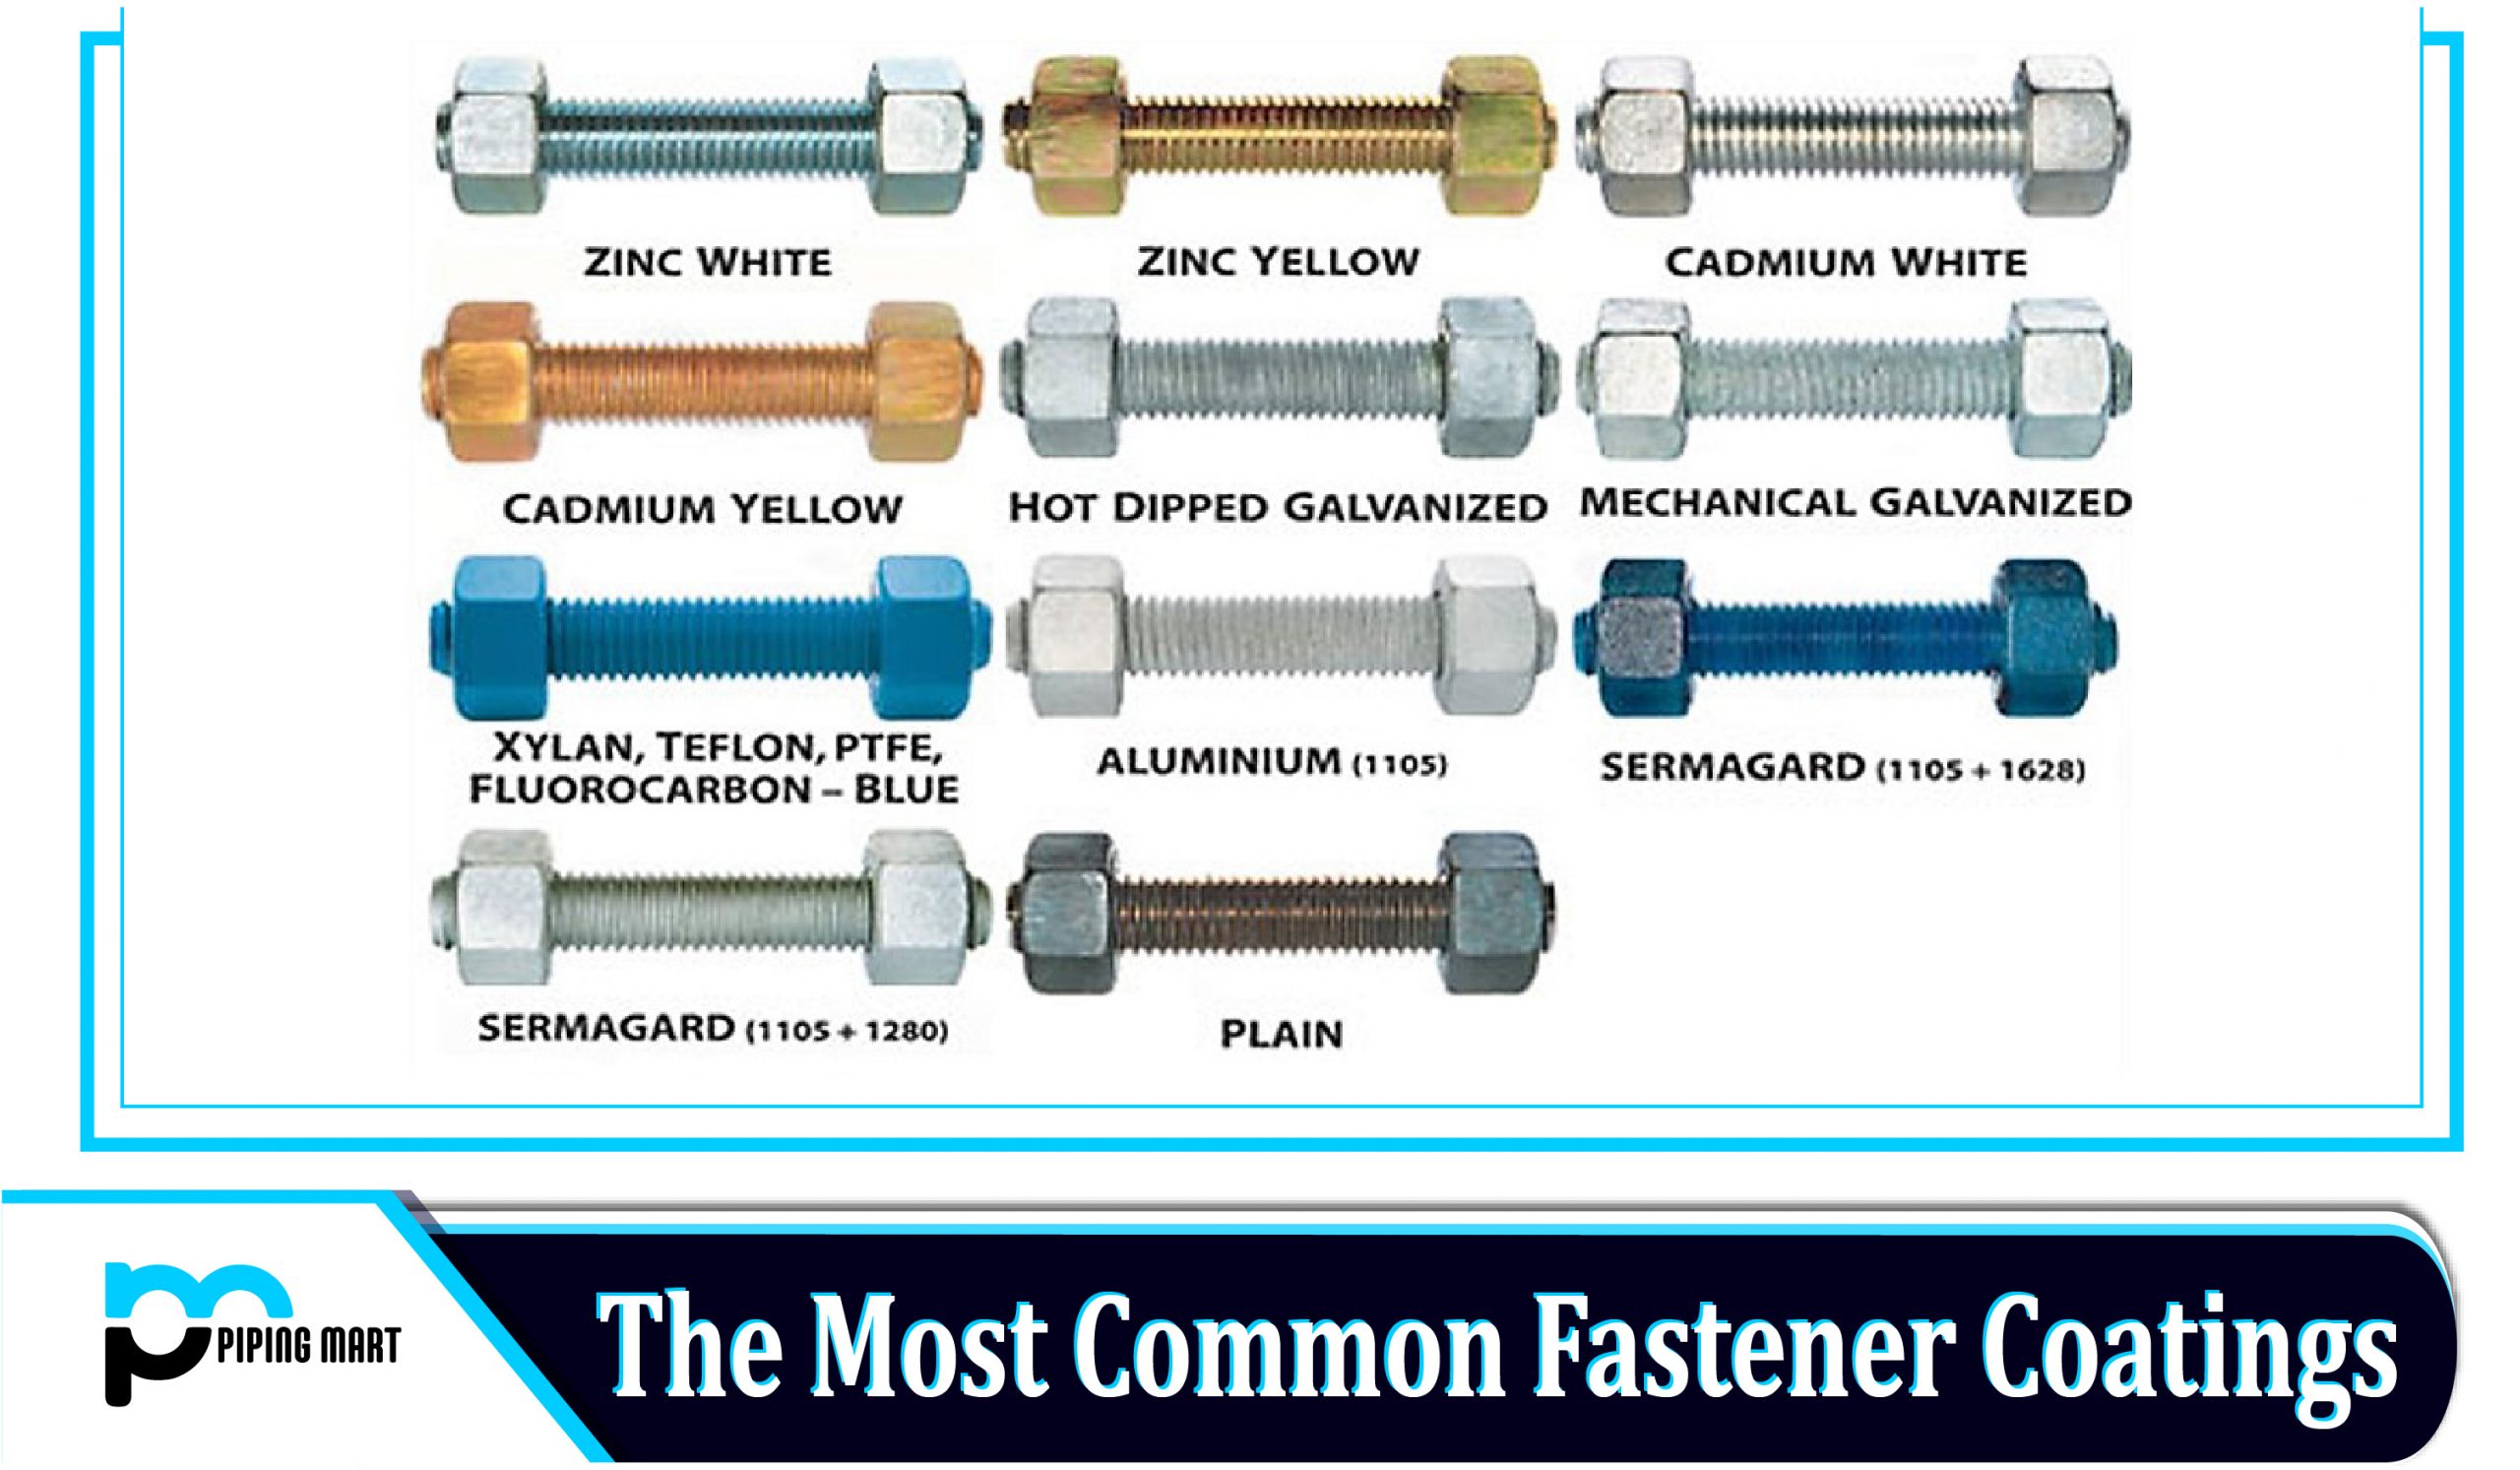 The Most Common Fastener Coatings